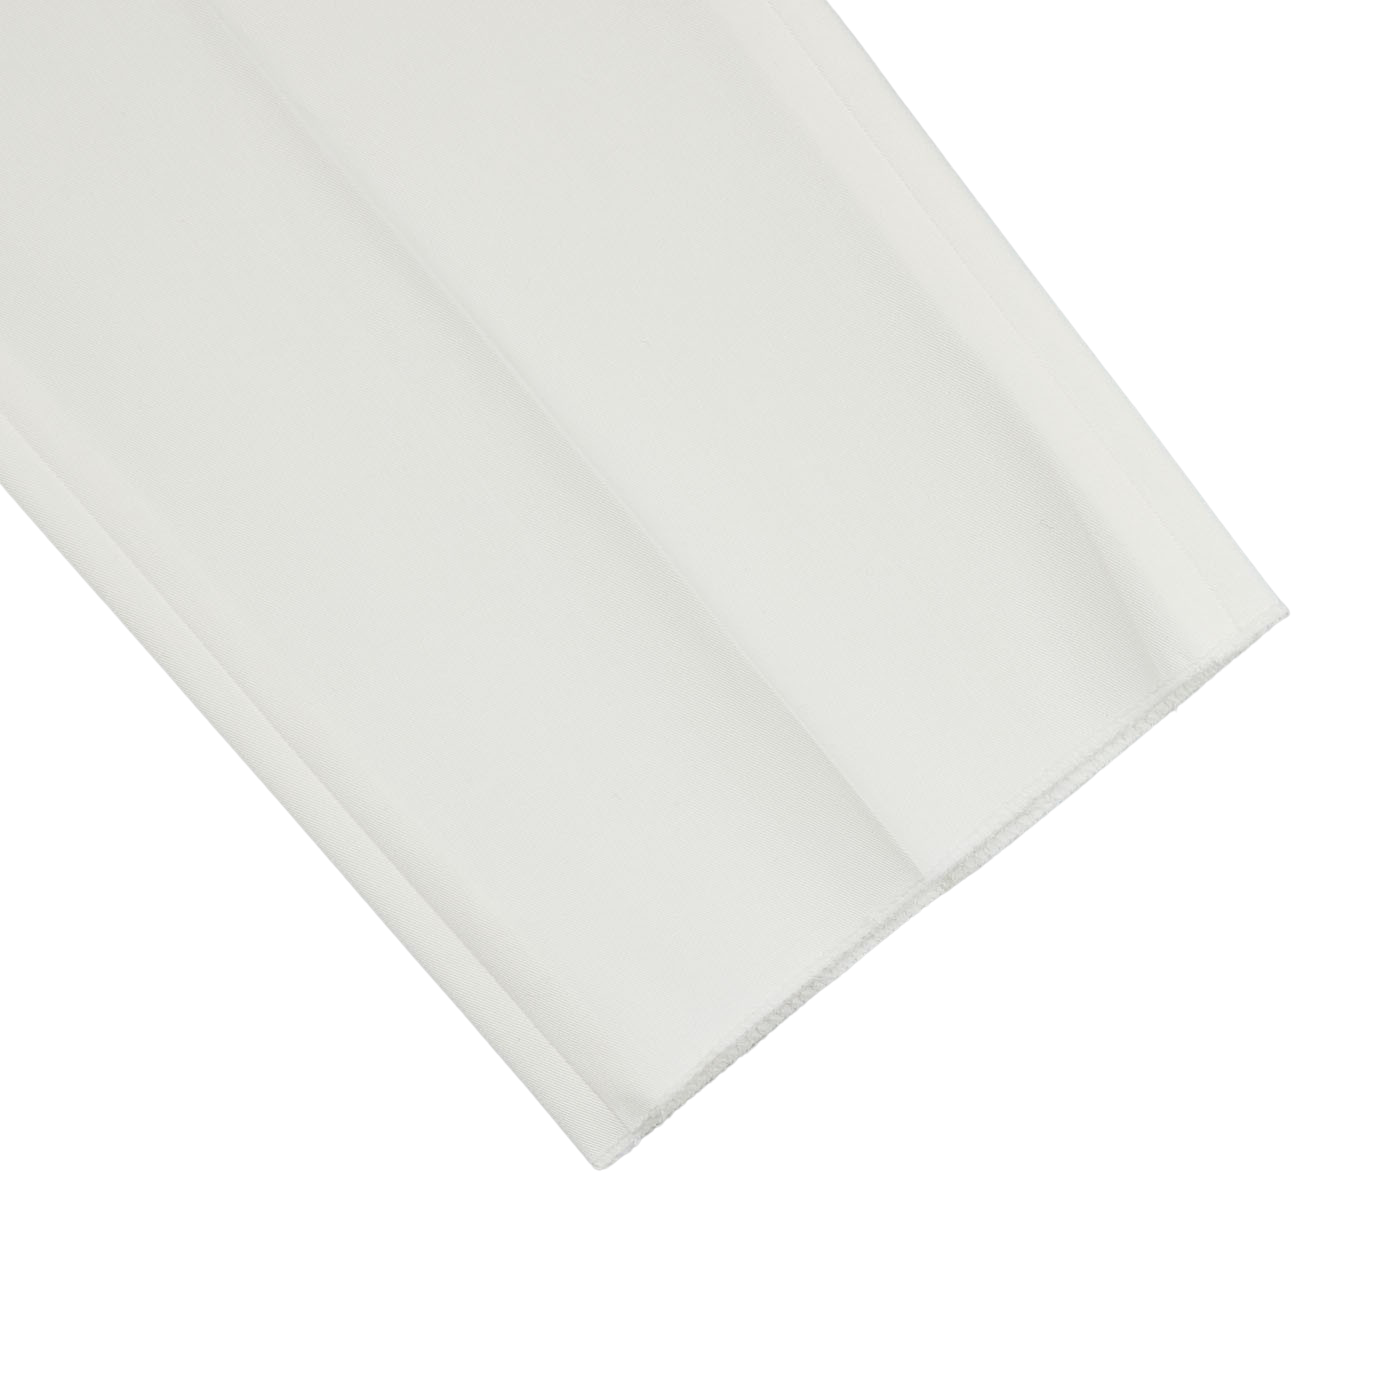 A white plastic sheet on a Luigi Bianchi Off-White Cotton Twill Flat Front Trousers surface.